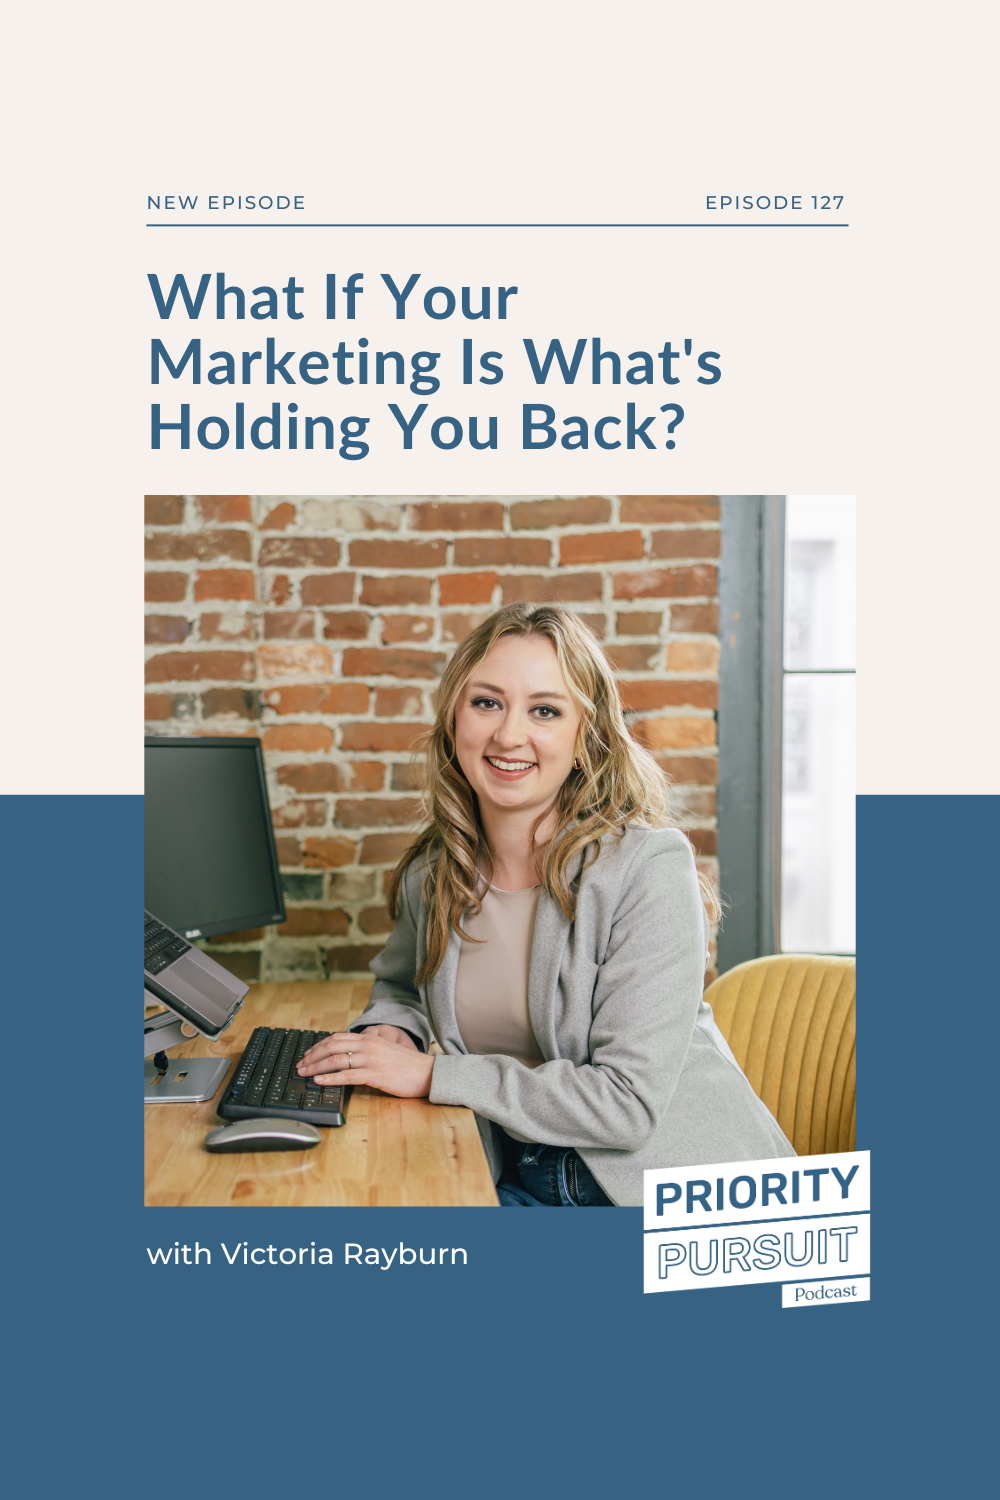 Victoria Rayburn explains five signs your marketing is holding you back on “The Priority Pursuit Podcast”—a podcast for small businesses.  